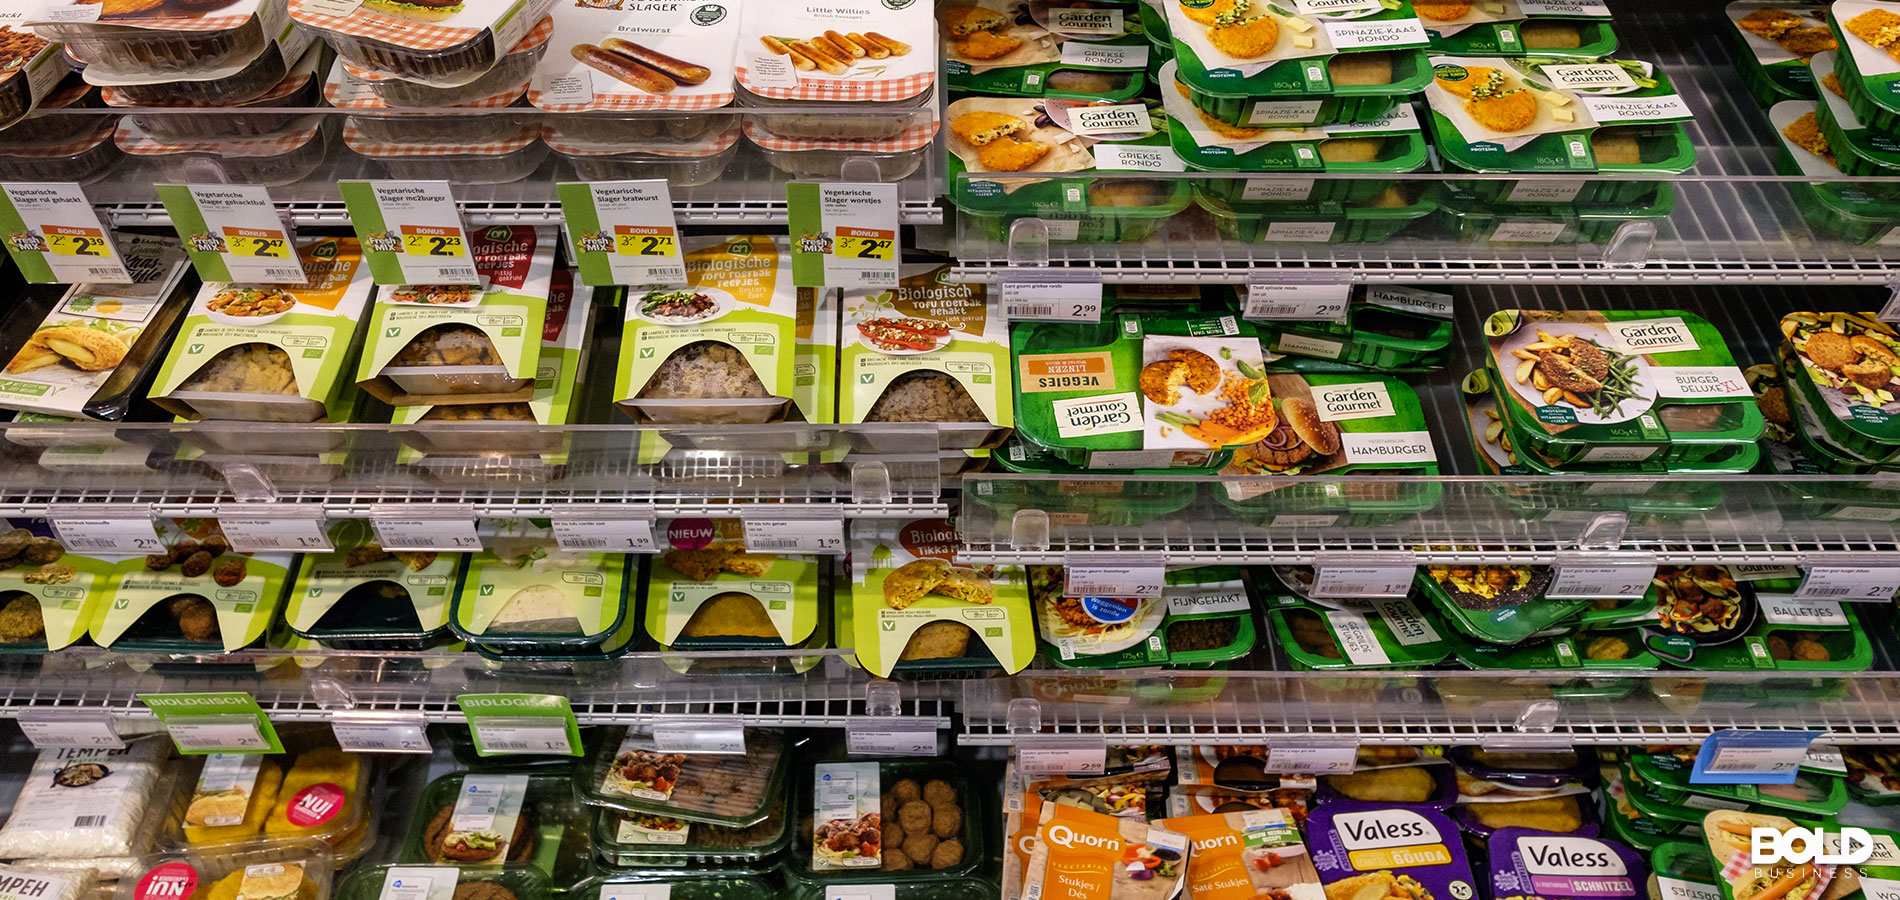 An entire section in the grocer for meat alternatives